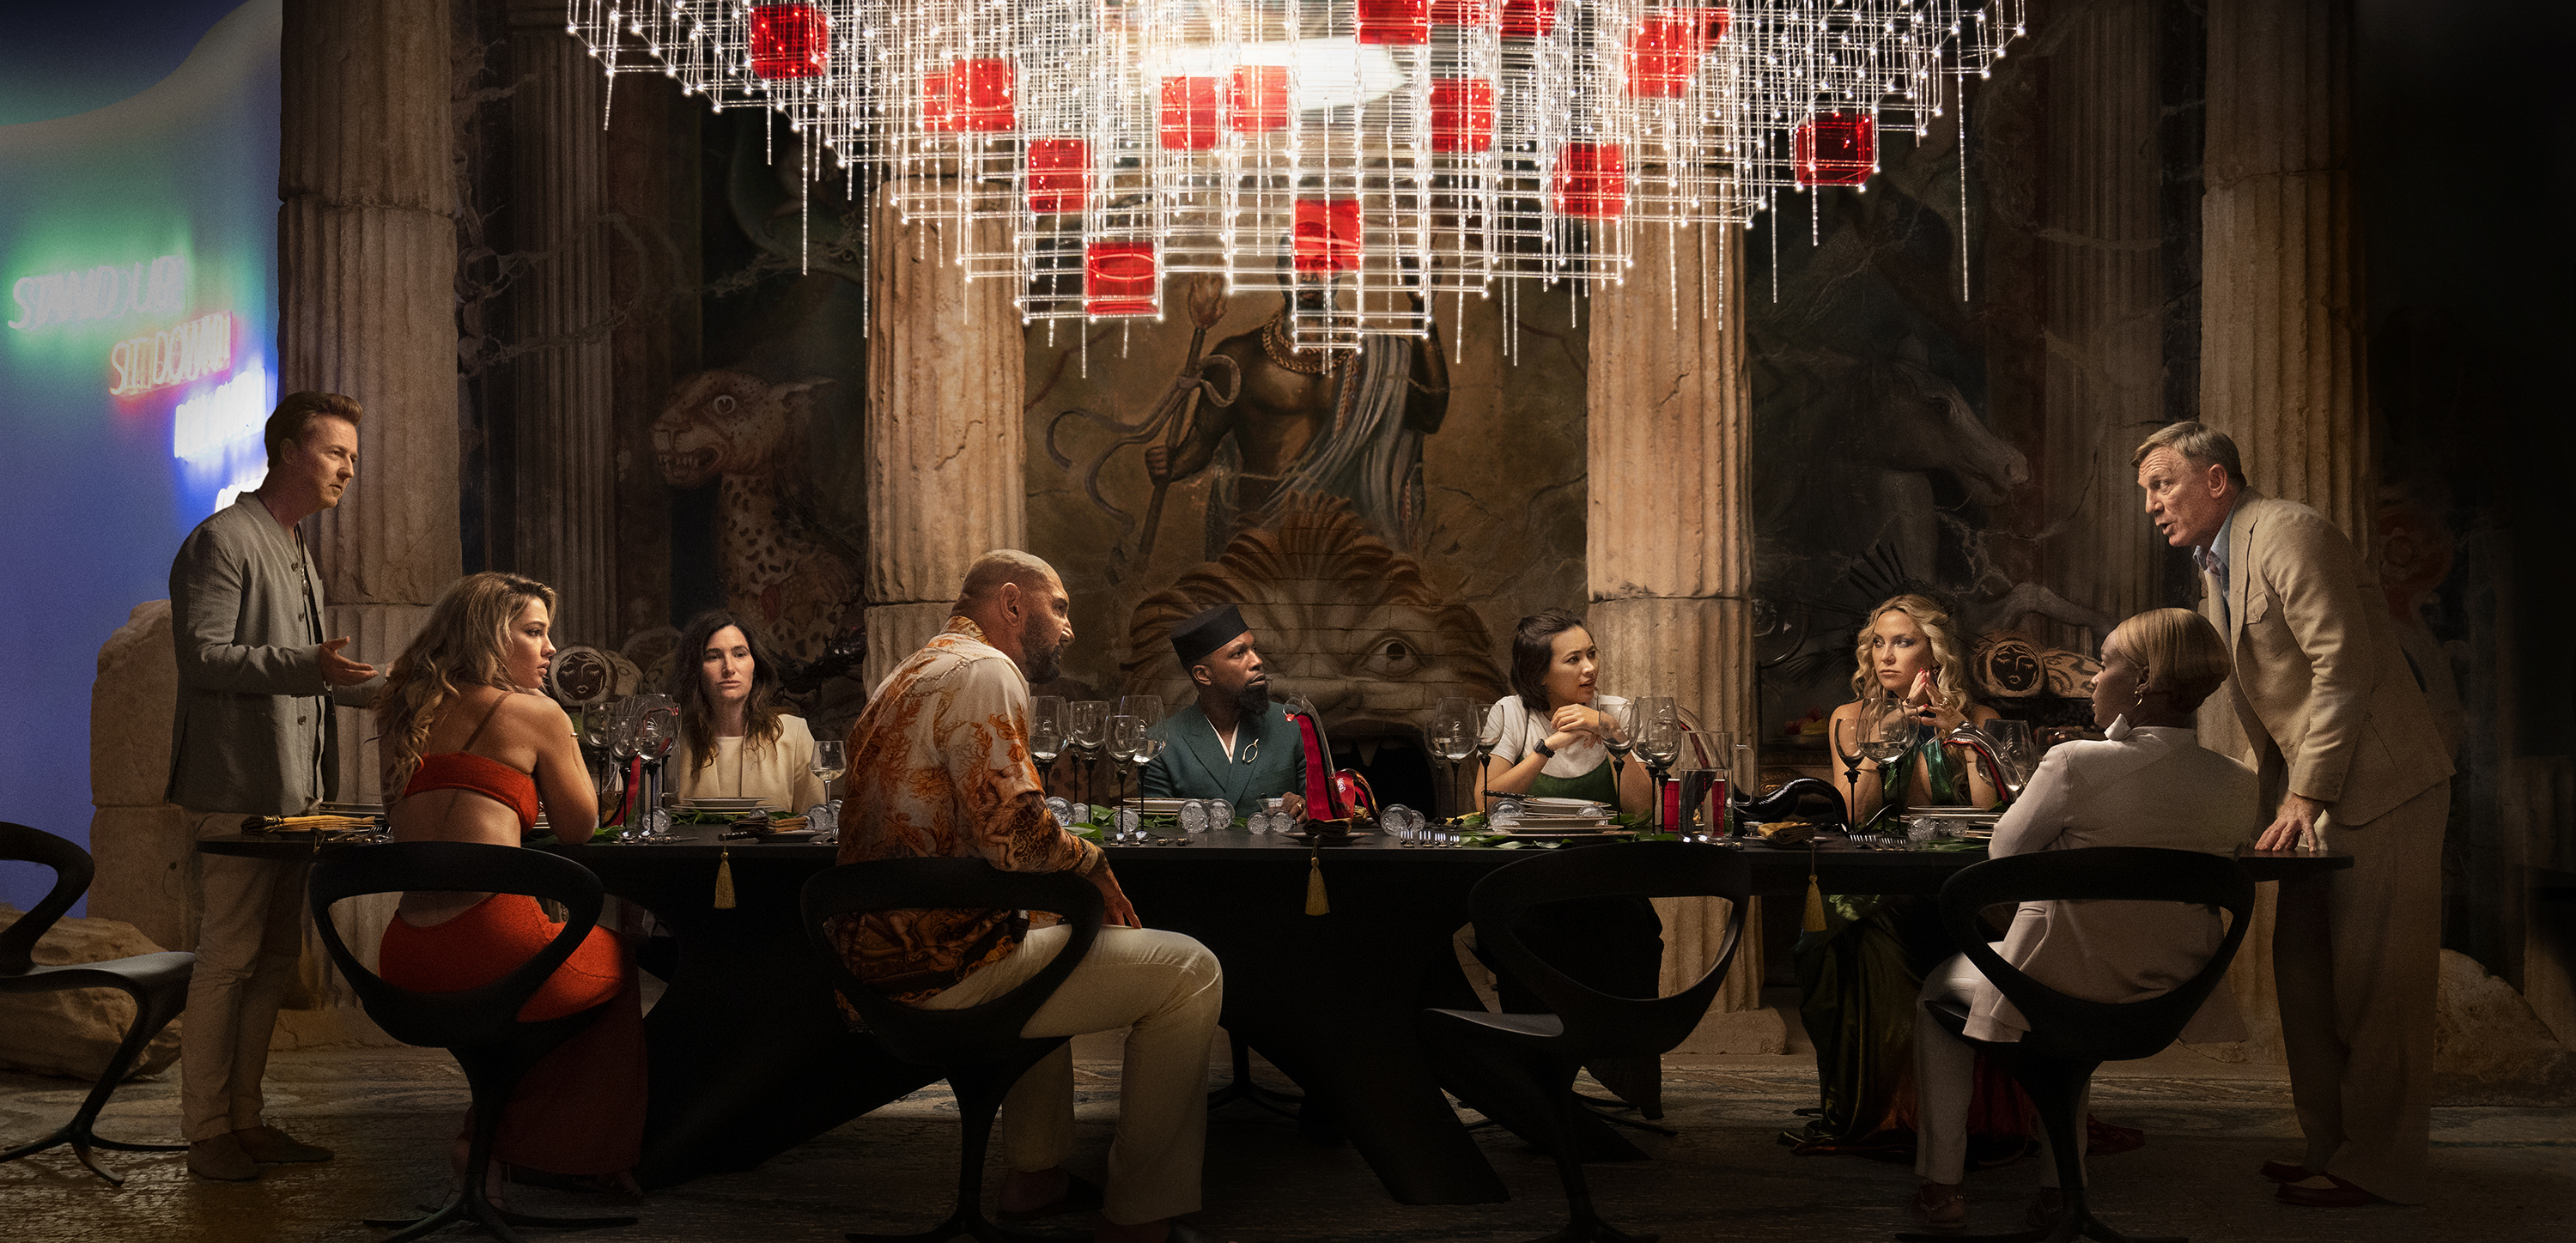 A  scene from "Glass Onion: A Knives Out Mystery" featuring (L-R) Edward Norton, Madelyn Cline, Kathryn Hahn, Dave Bautista, Leslie Odom Jr., Jessica Henwick, Kate Hudson, Janelle Monae, and Daniel Craig.